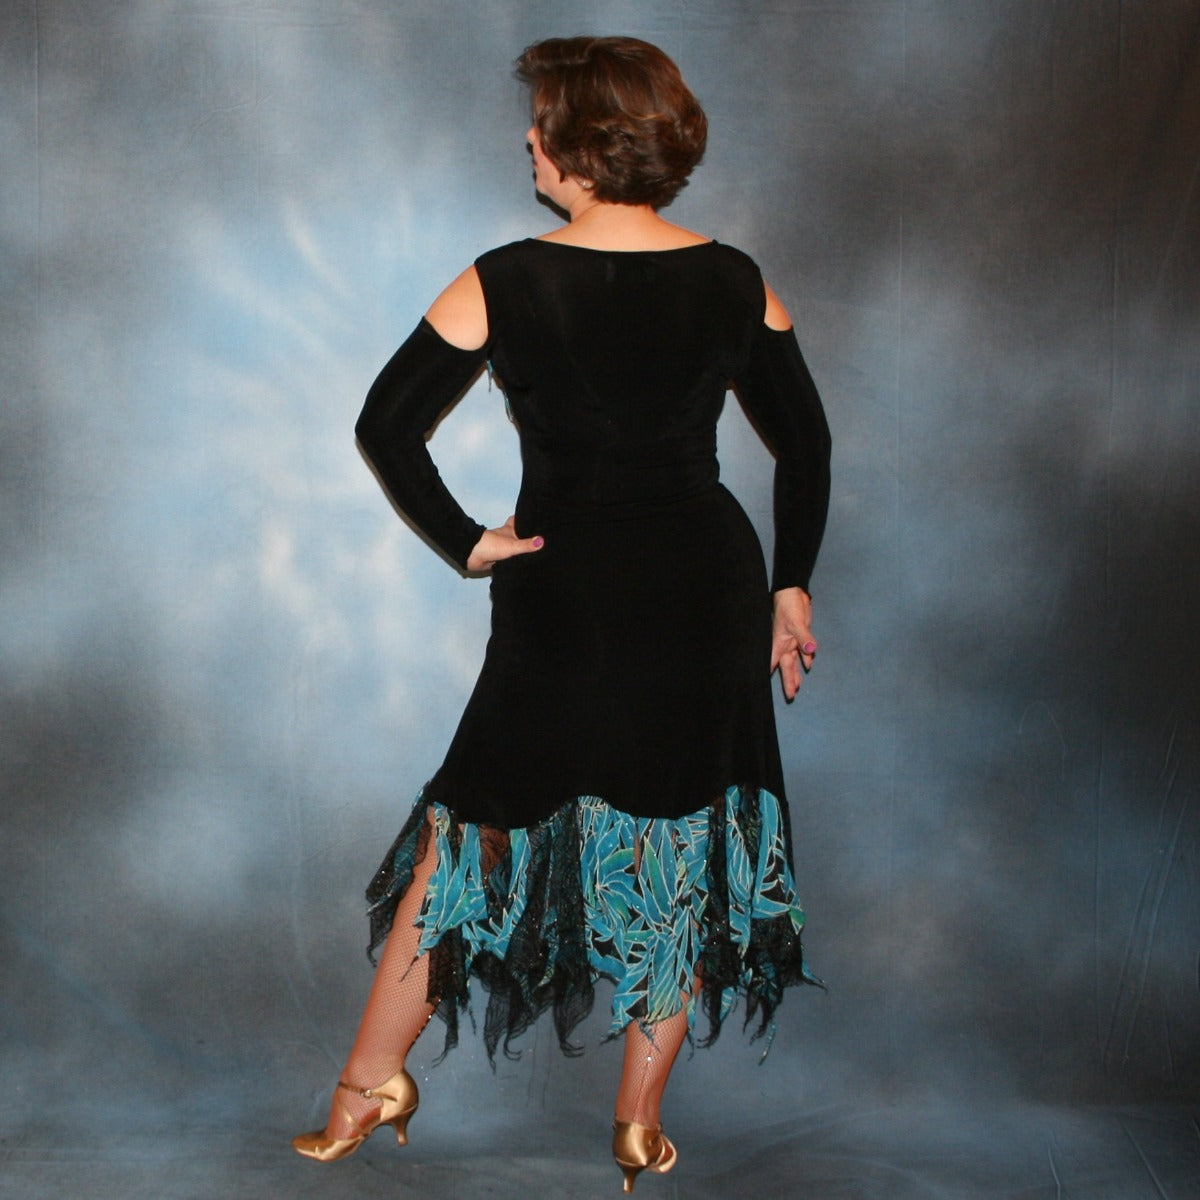 Crystal's Creations back view of black converta ballroom dress created in luxurious black slinky with turquoise, green & black tropical print